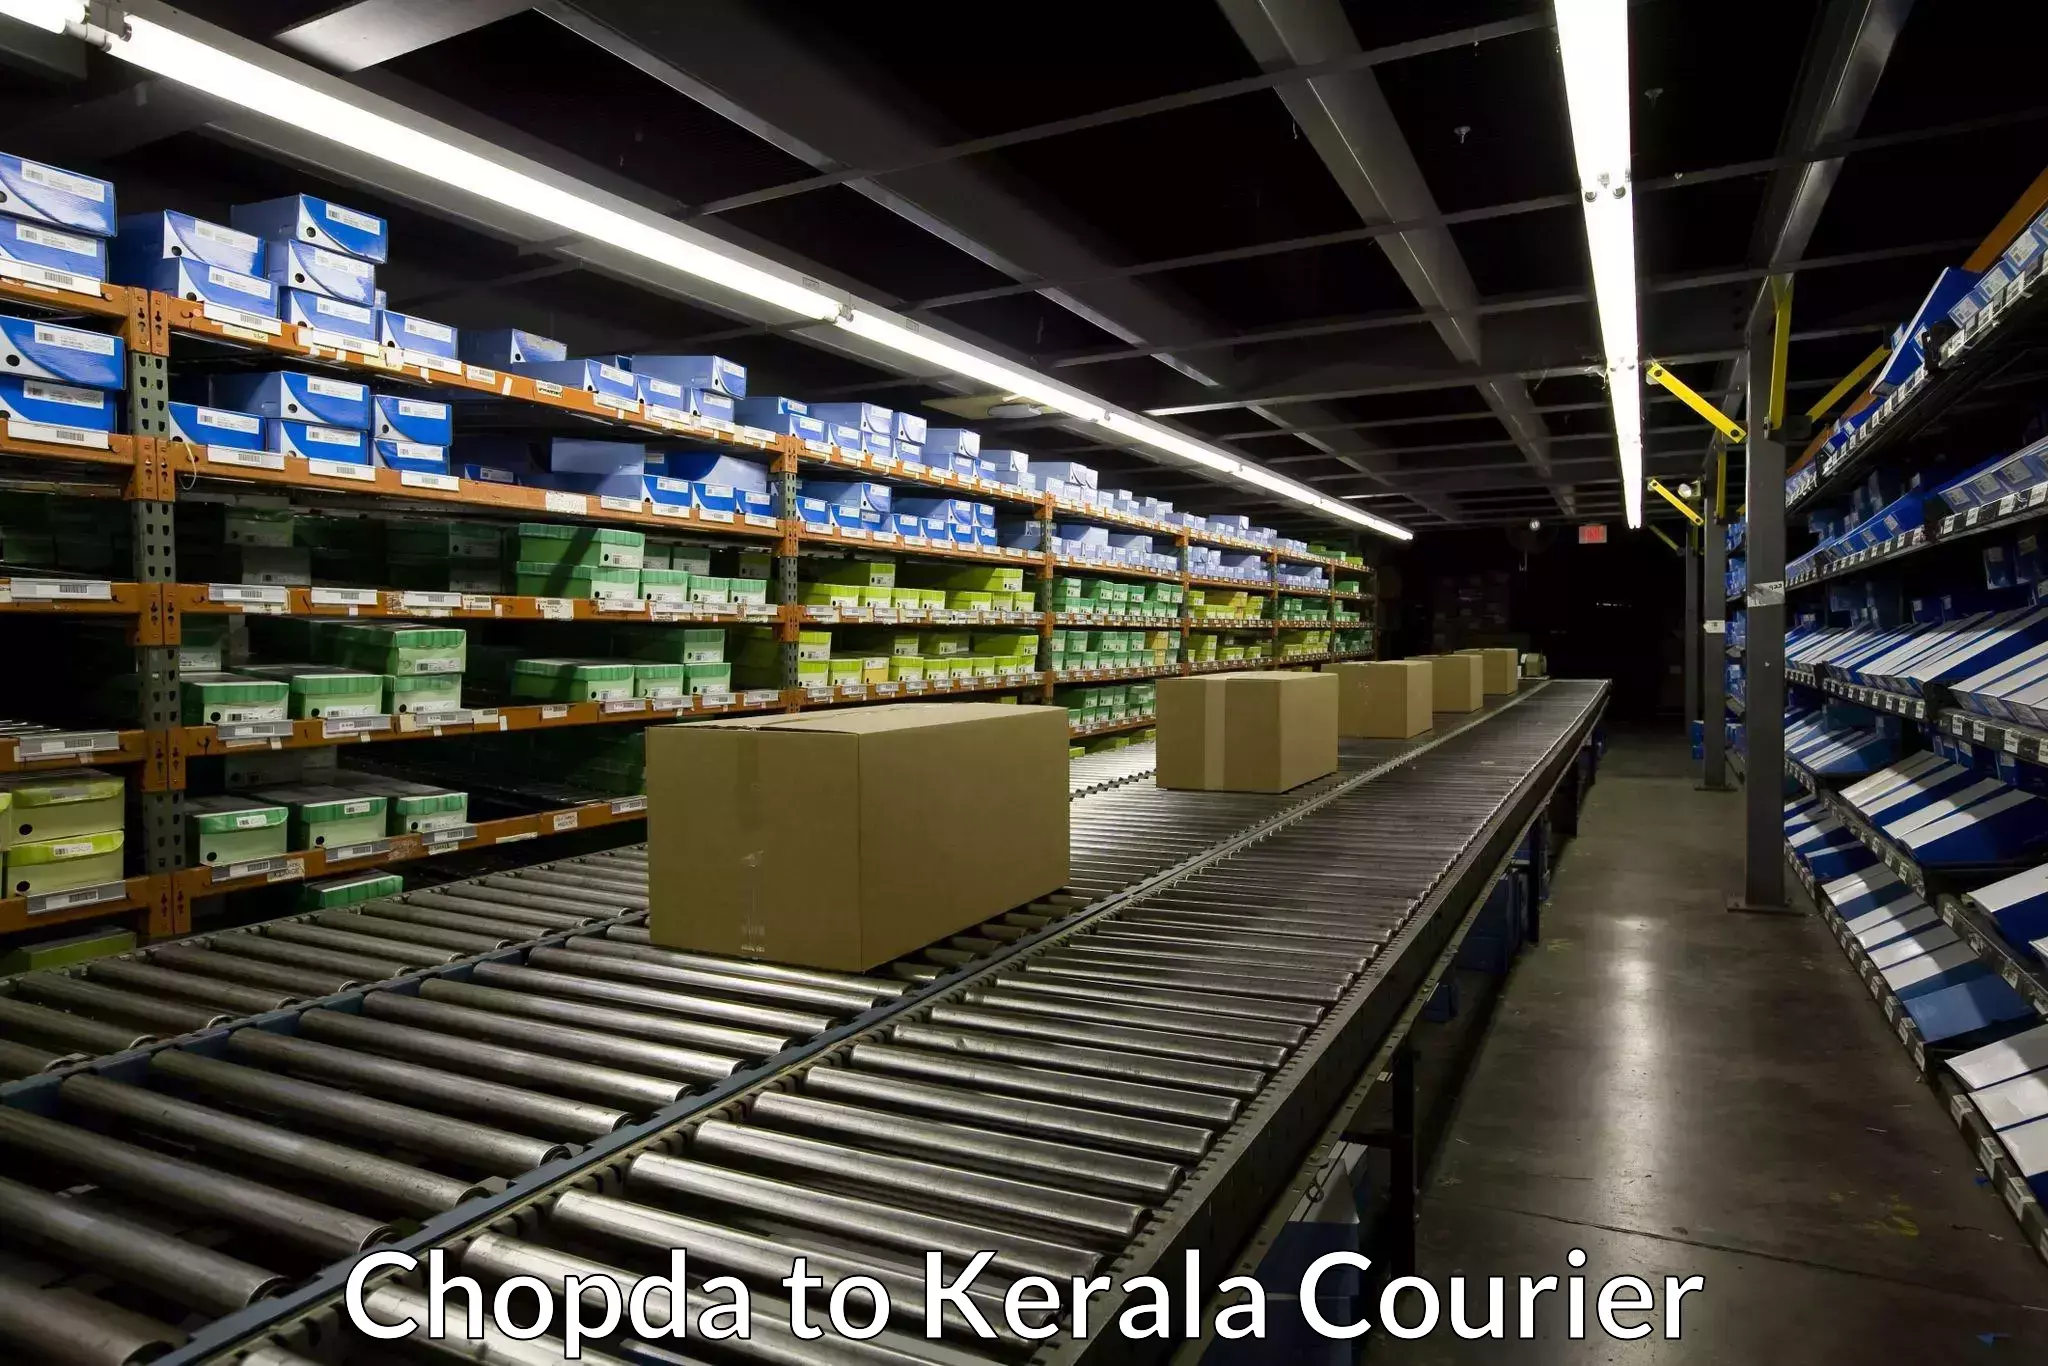 Flexible delivery schedules Chopda to Kozhikode